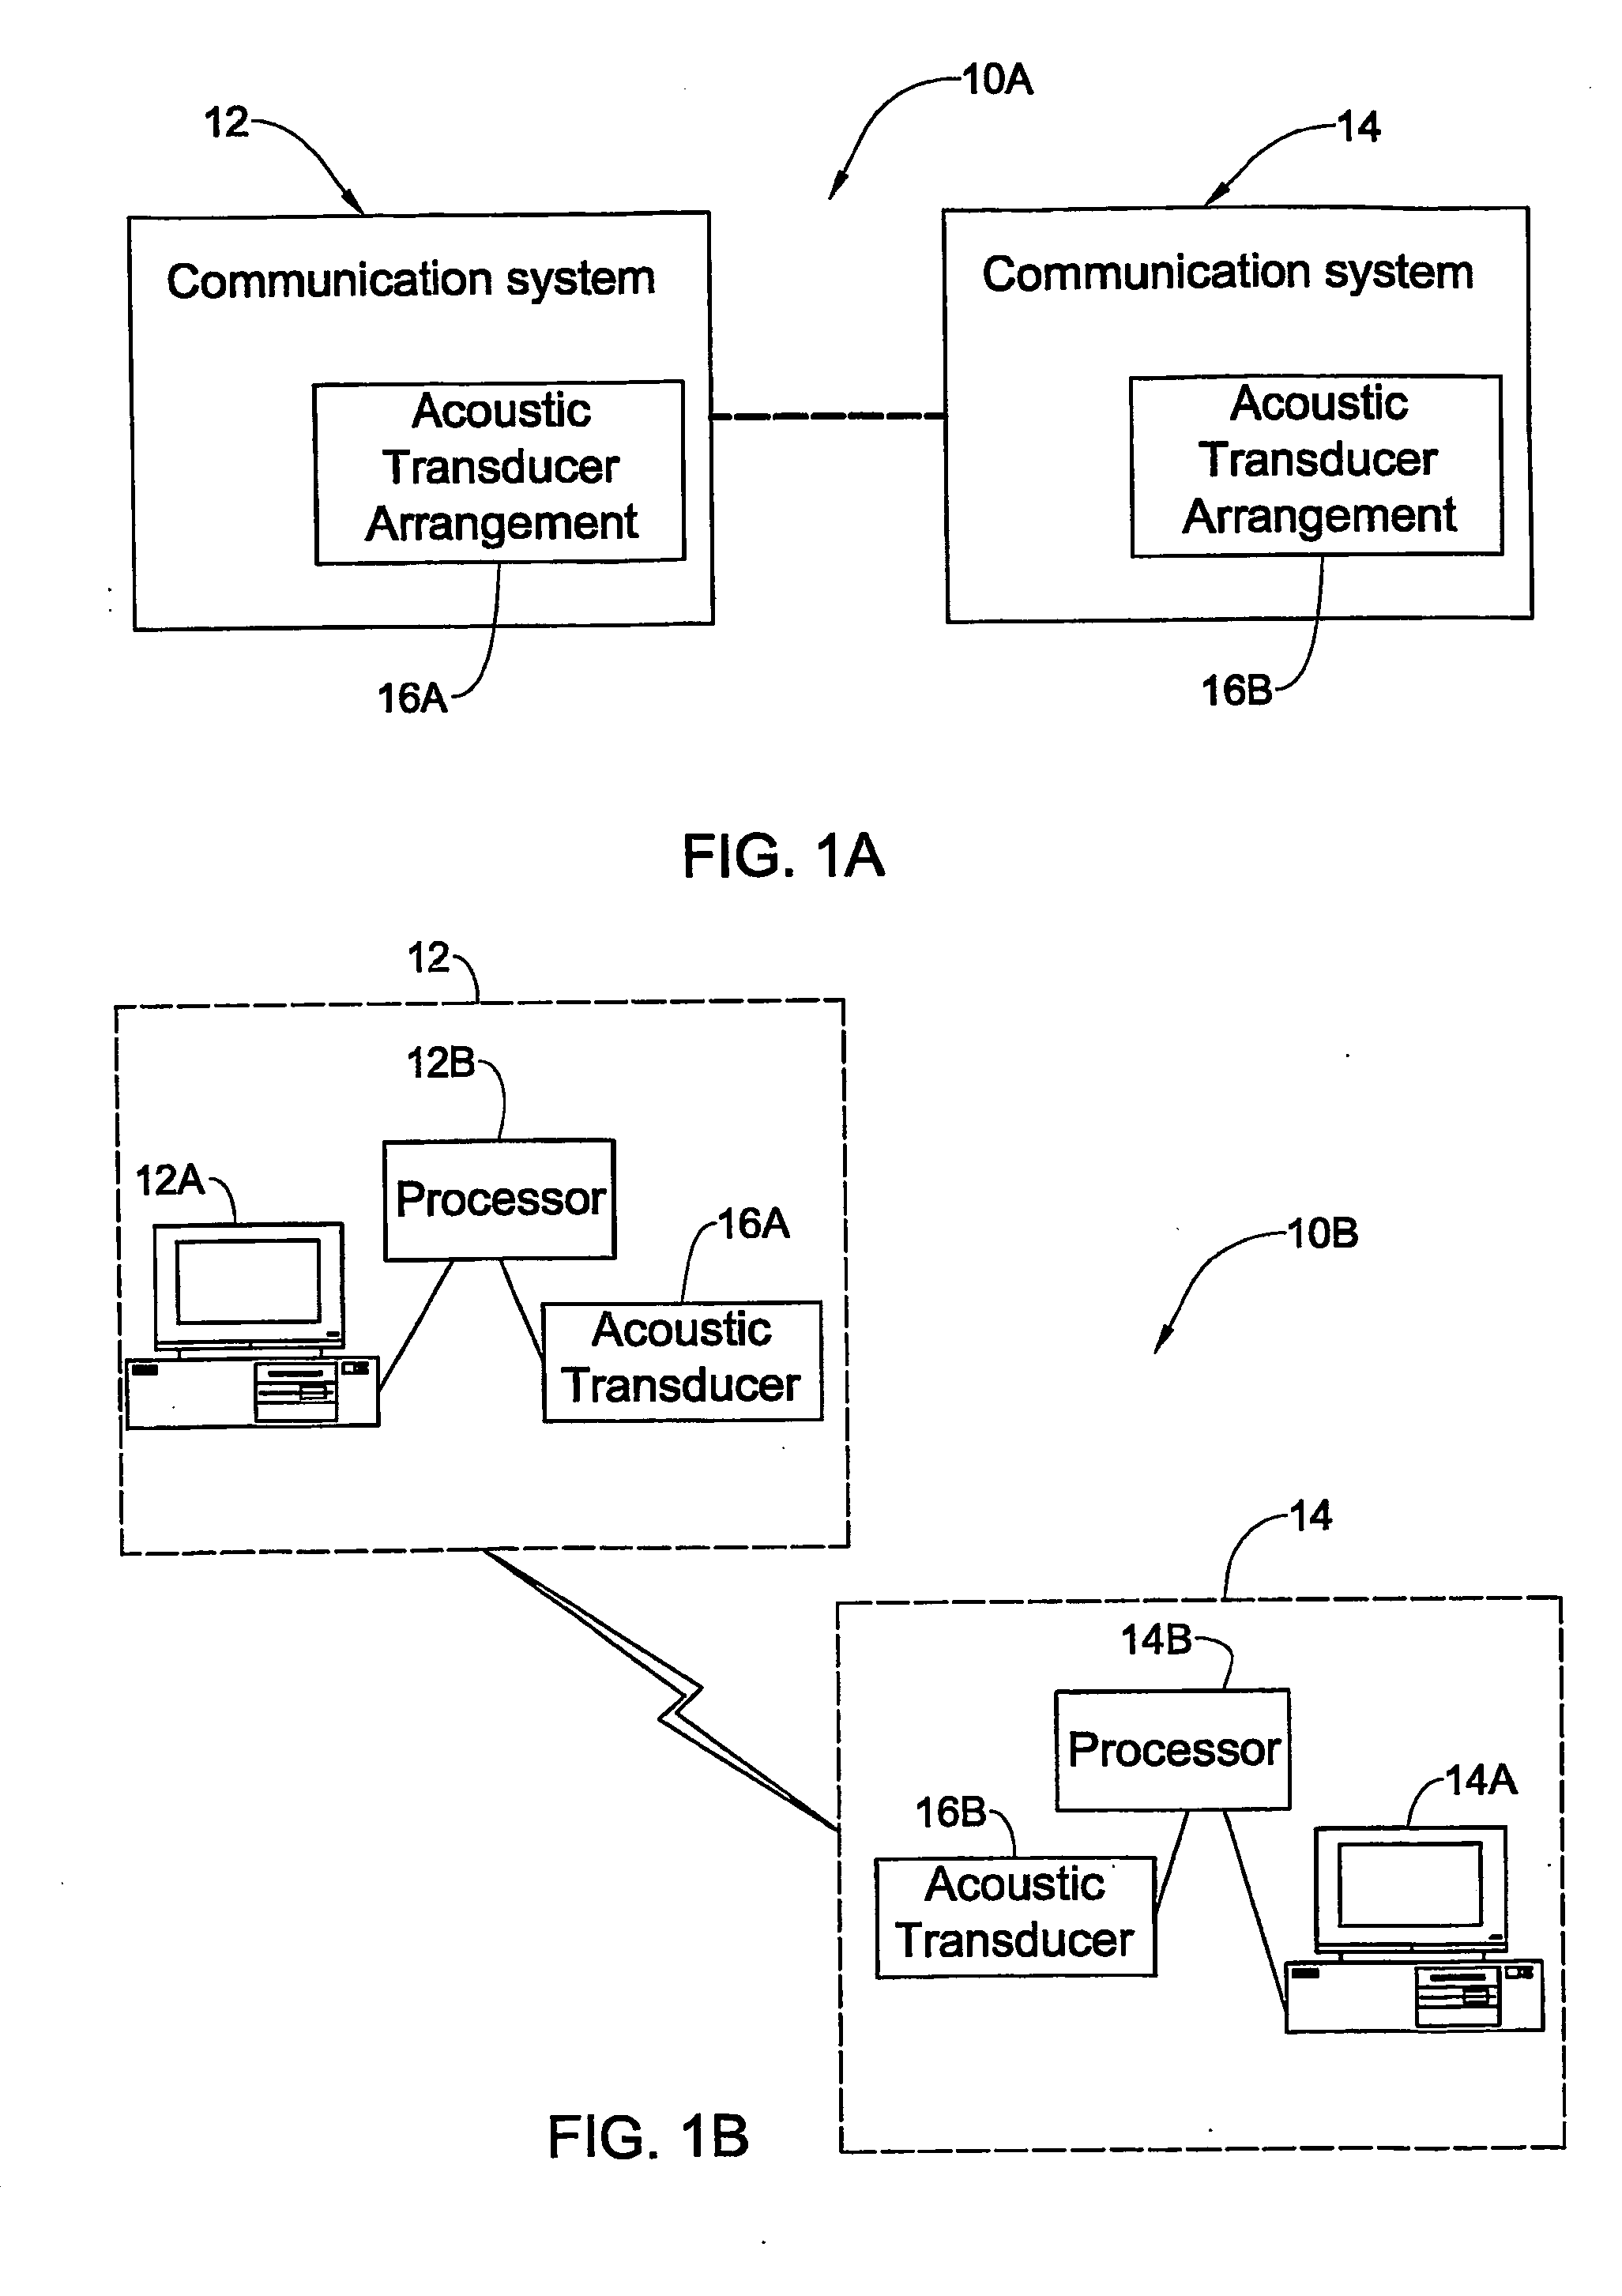 Method and system for acoustic communication